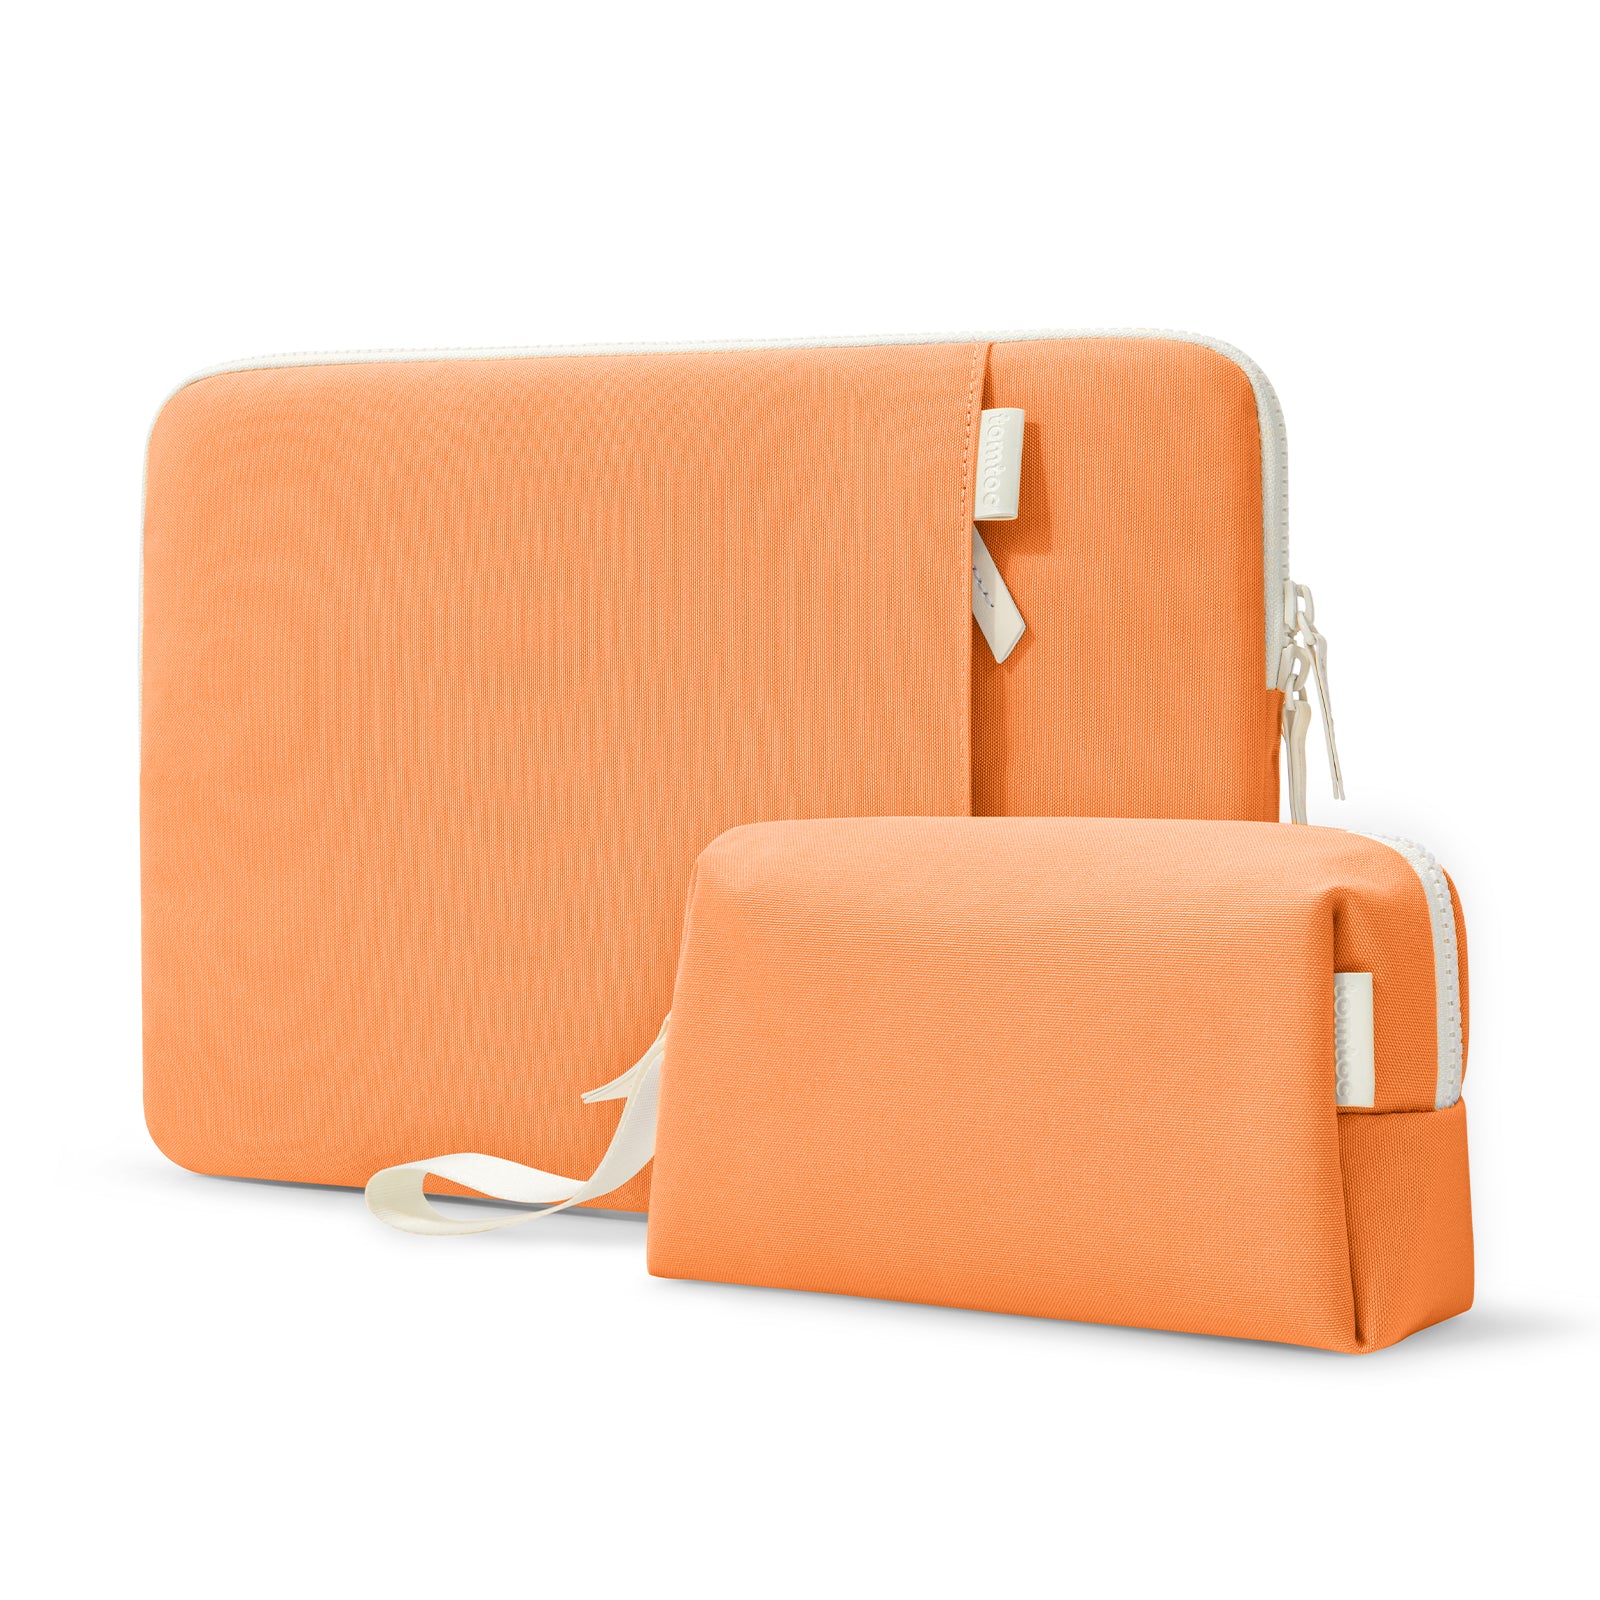 tomtoc Lady Laptop Sleeve for 14-inch MacBook Pro M1 Pro/Max A2442 2021 | Orange